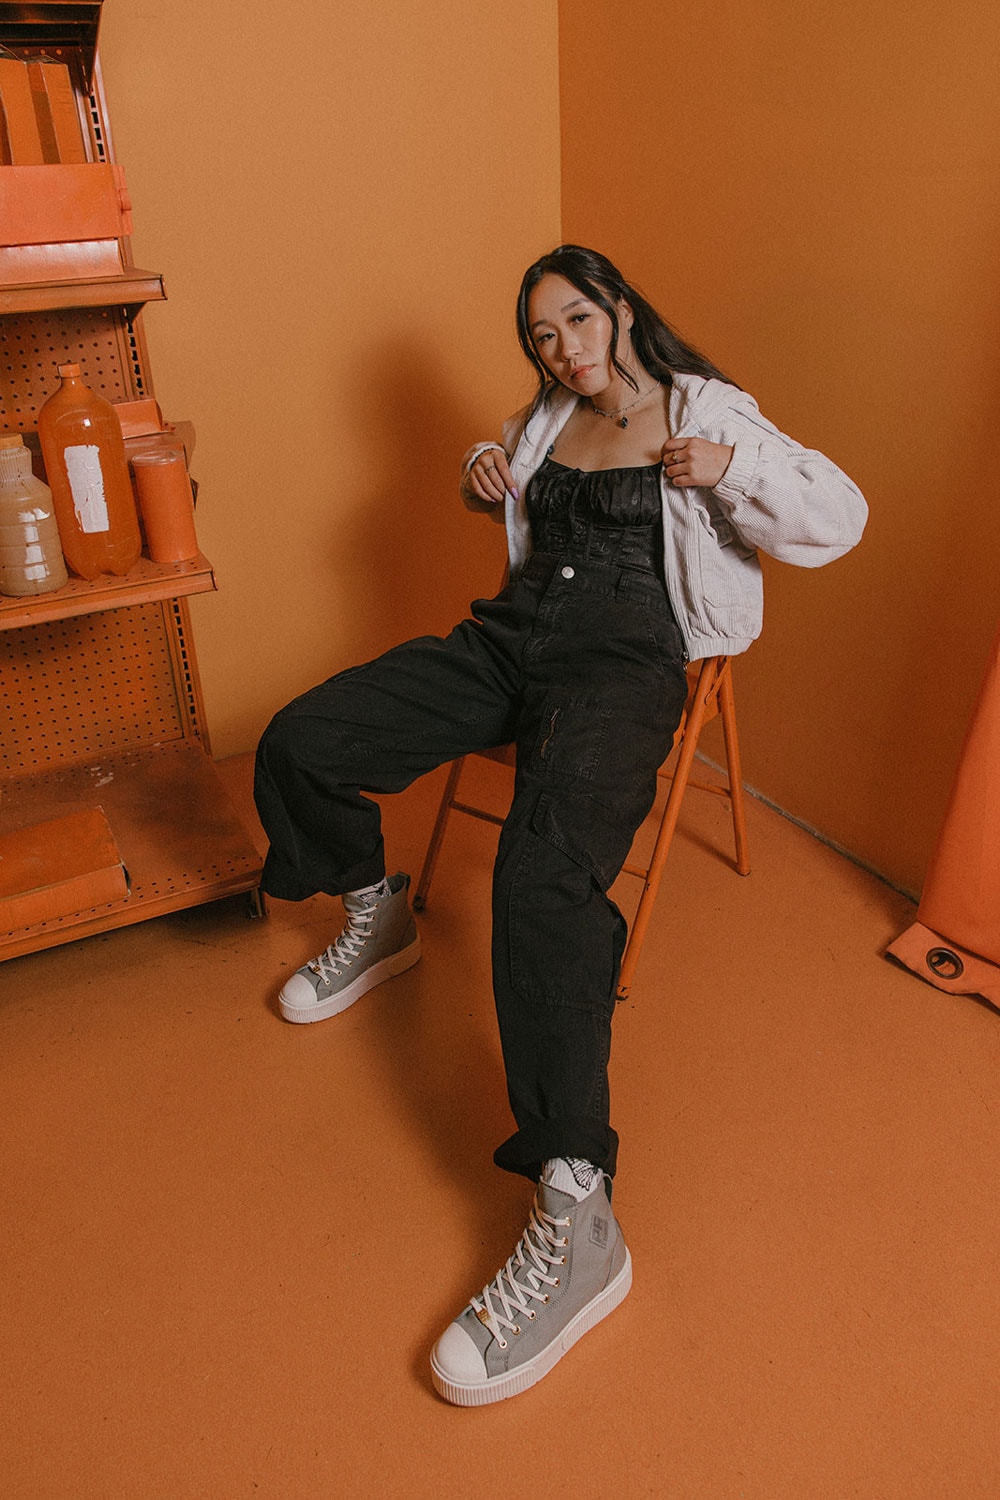 pf flyers allston sneaker release new show cement mirage white-peaches and cream colorway spring summer 2023 footwear drop all american hi sneaker high top female-led female focused